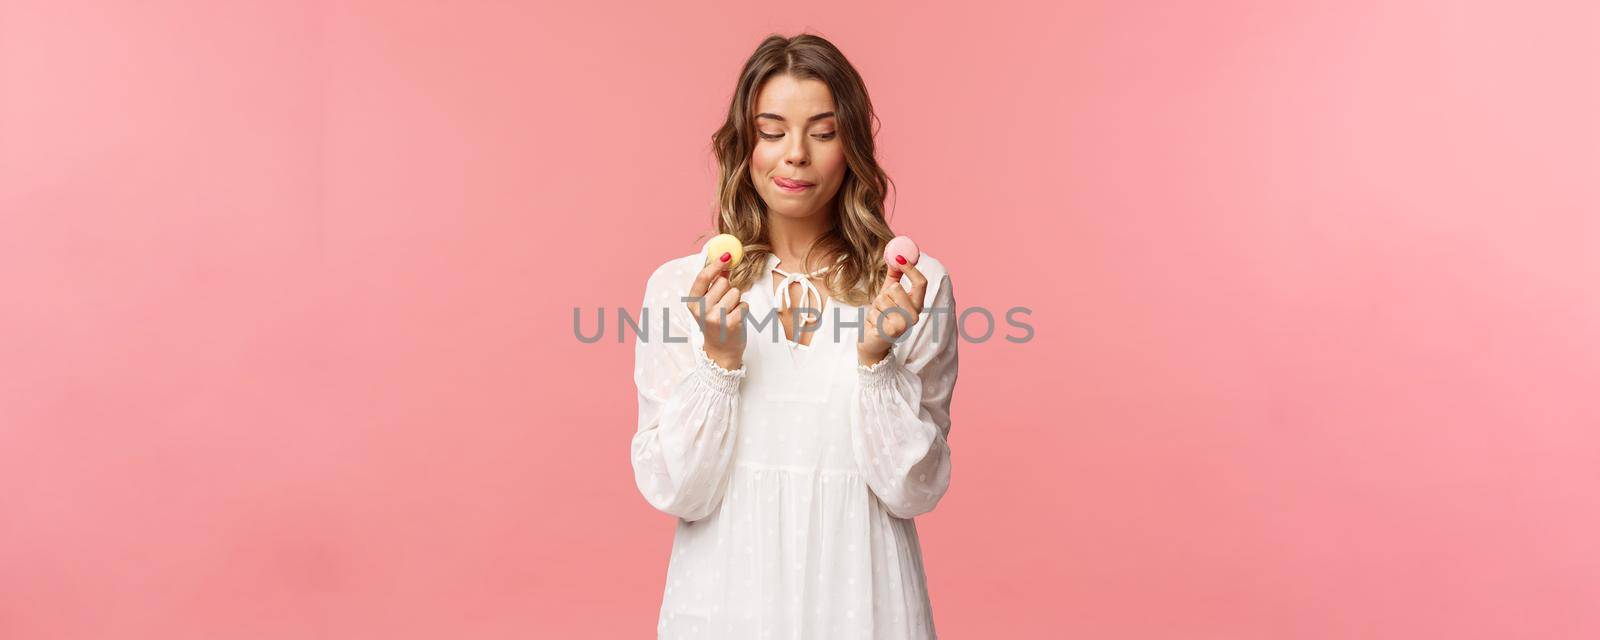 Holidays, spring and party concept. Portrait of cute romantic blond girl in white dress, licking lips as tempting to eat delicious dessert, holding two macarons and look pleased, pink background.